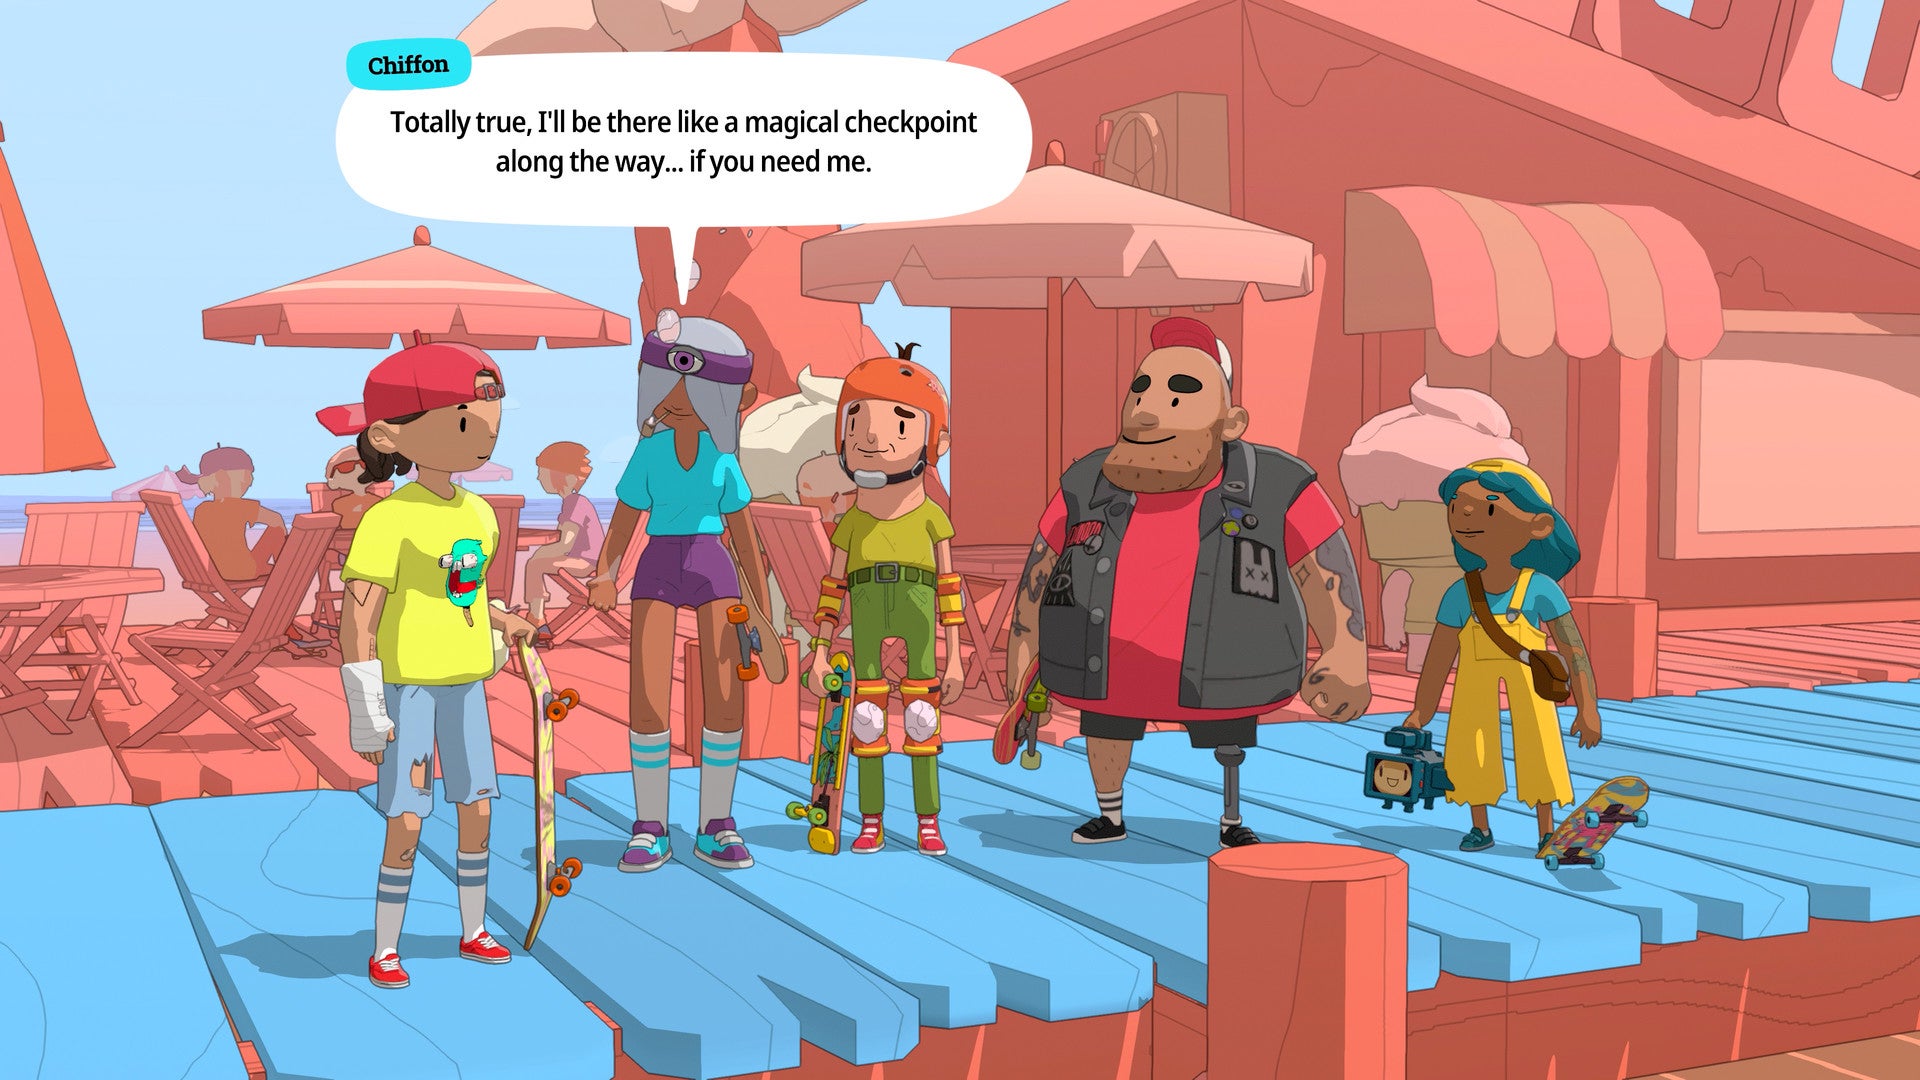 2022 best games OlliOlli World - five quirky characters chat on a bright blue platform in front of coral pink buildings and structures